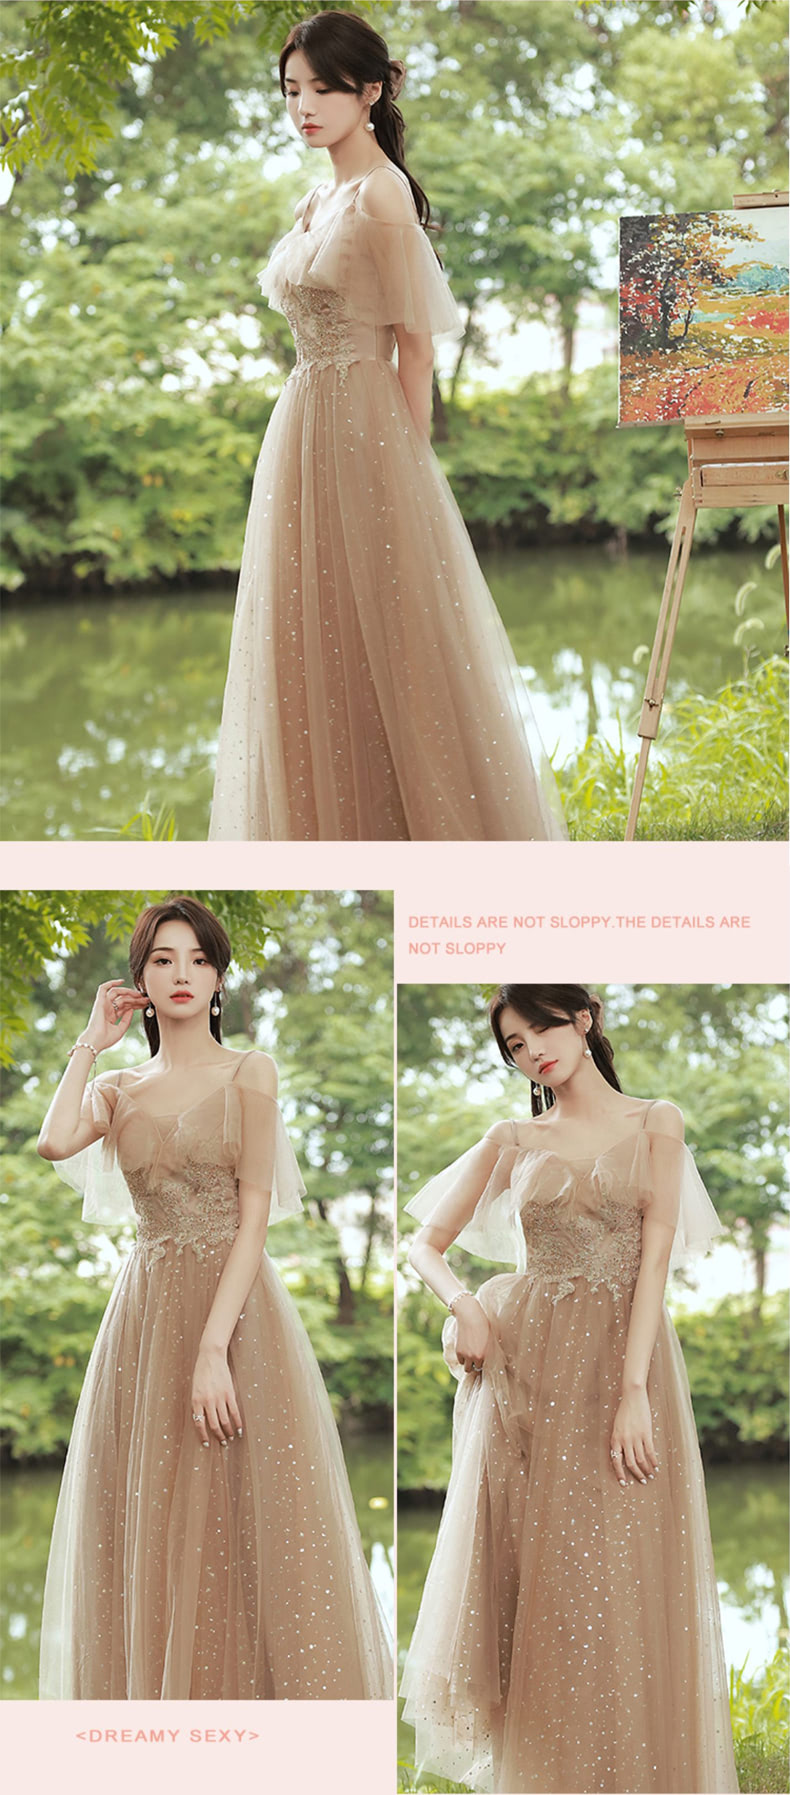 Champagne-Maid-of-Honor-Bridal-Party-Long-Dress-Bridesmaid-Gown18.jpg